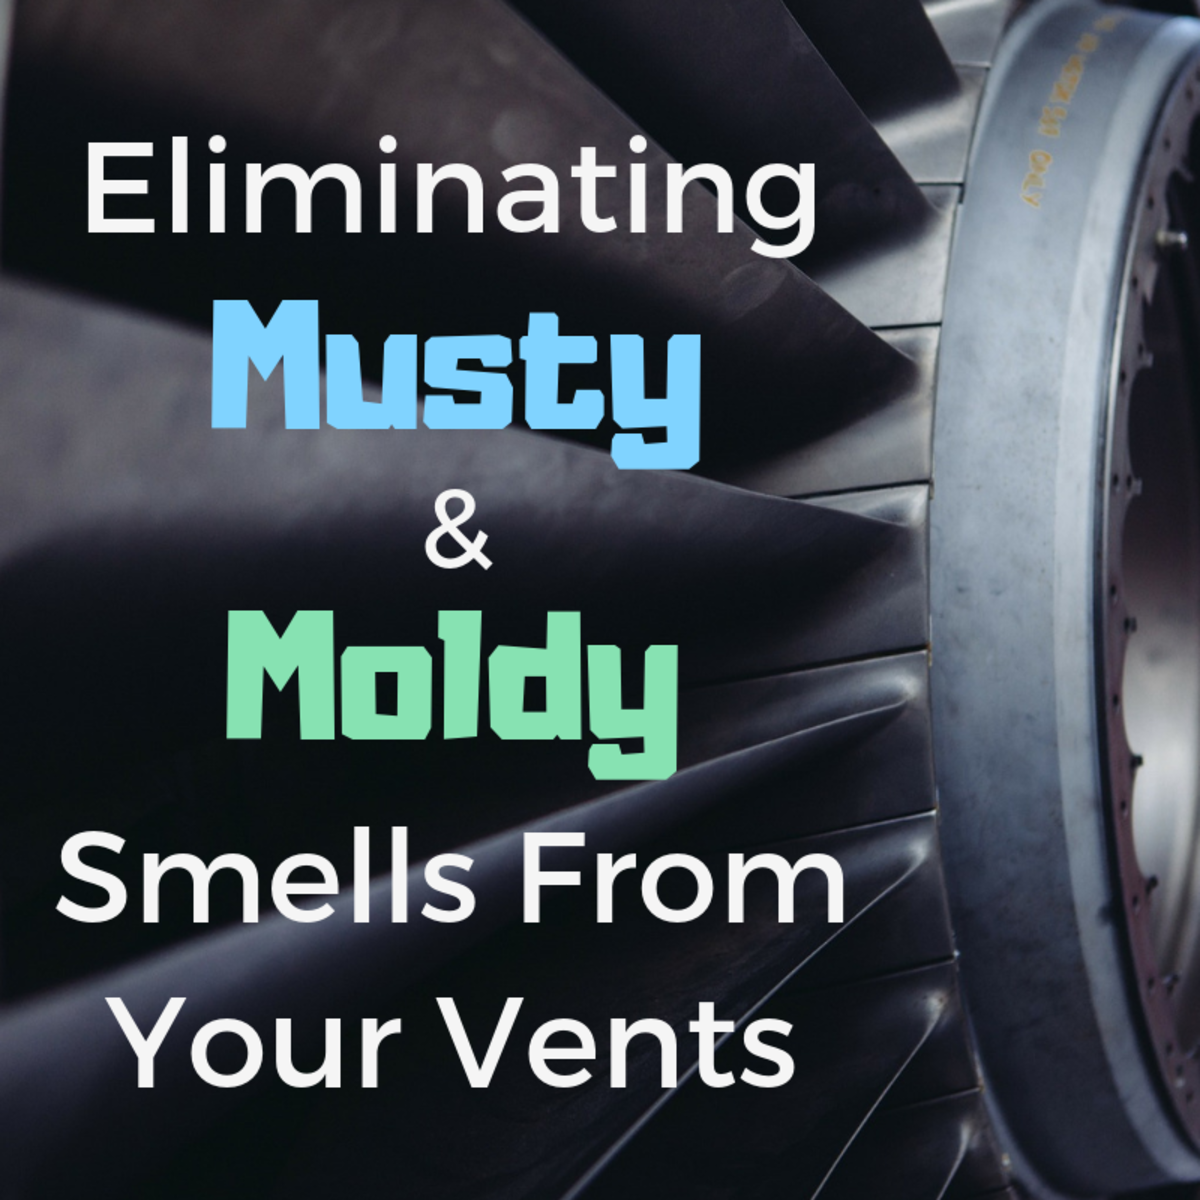 Have you been trying to figure out how to stop smells from coming through vents in your home? This article provides some troubleshooting tips for finding the source of musty and moldy odors coming from your air ducts and what you can do about it.